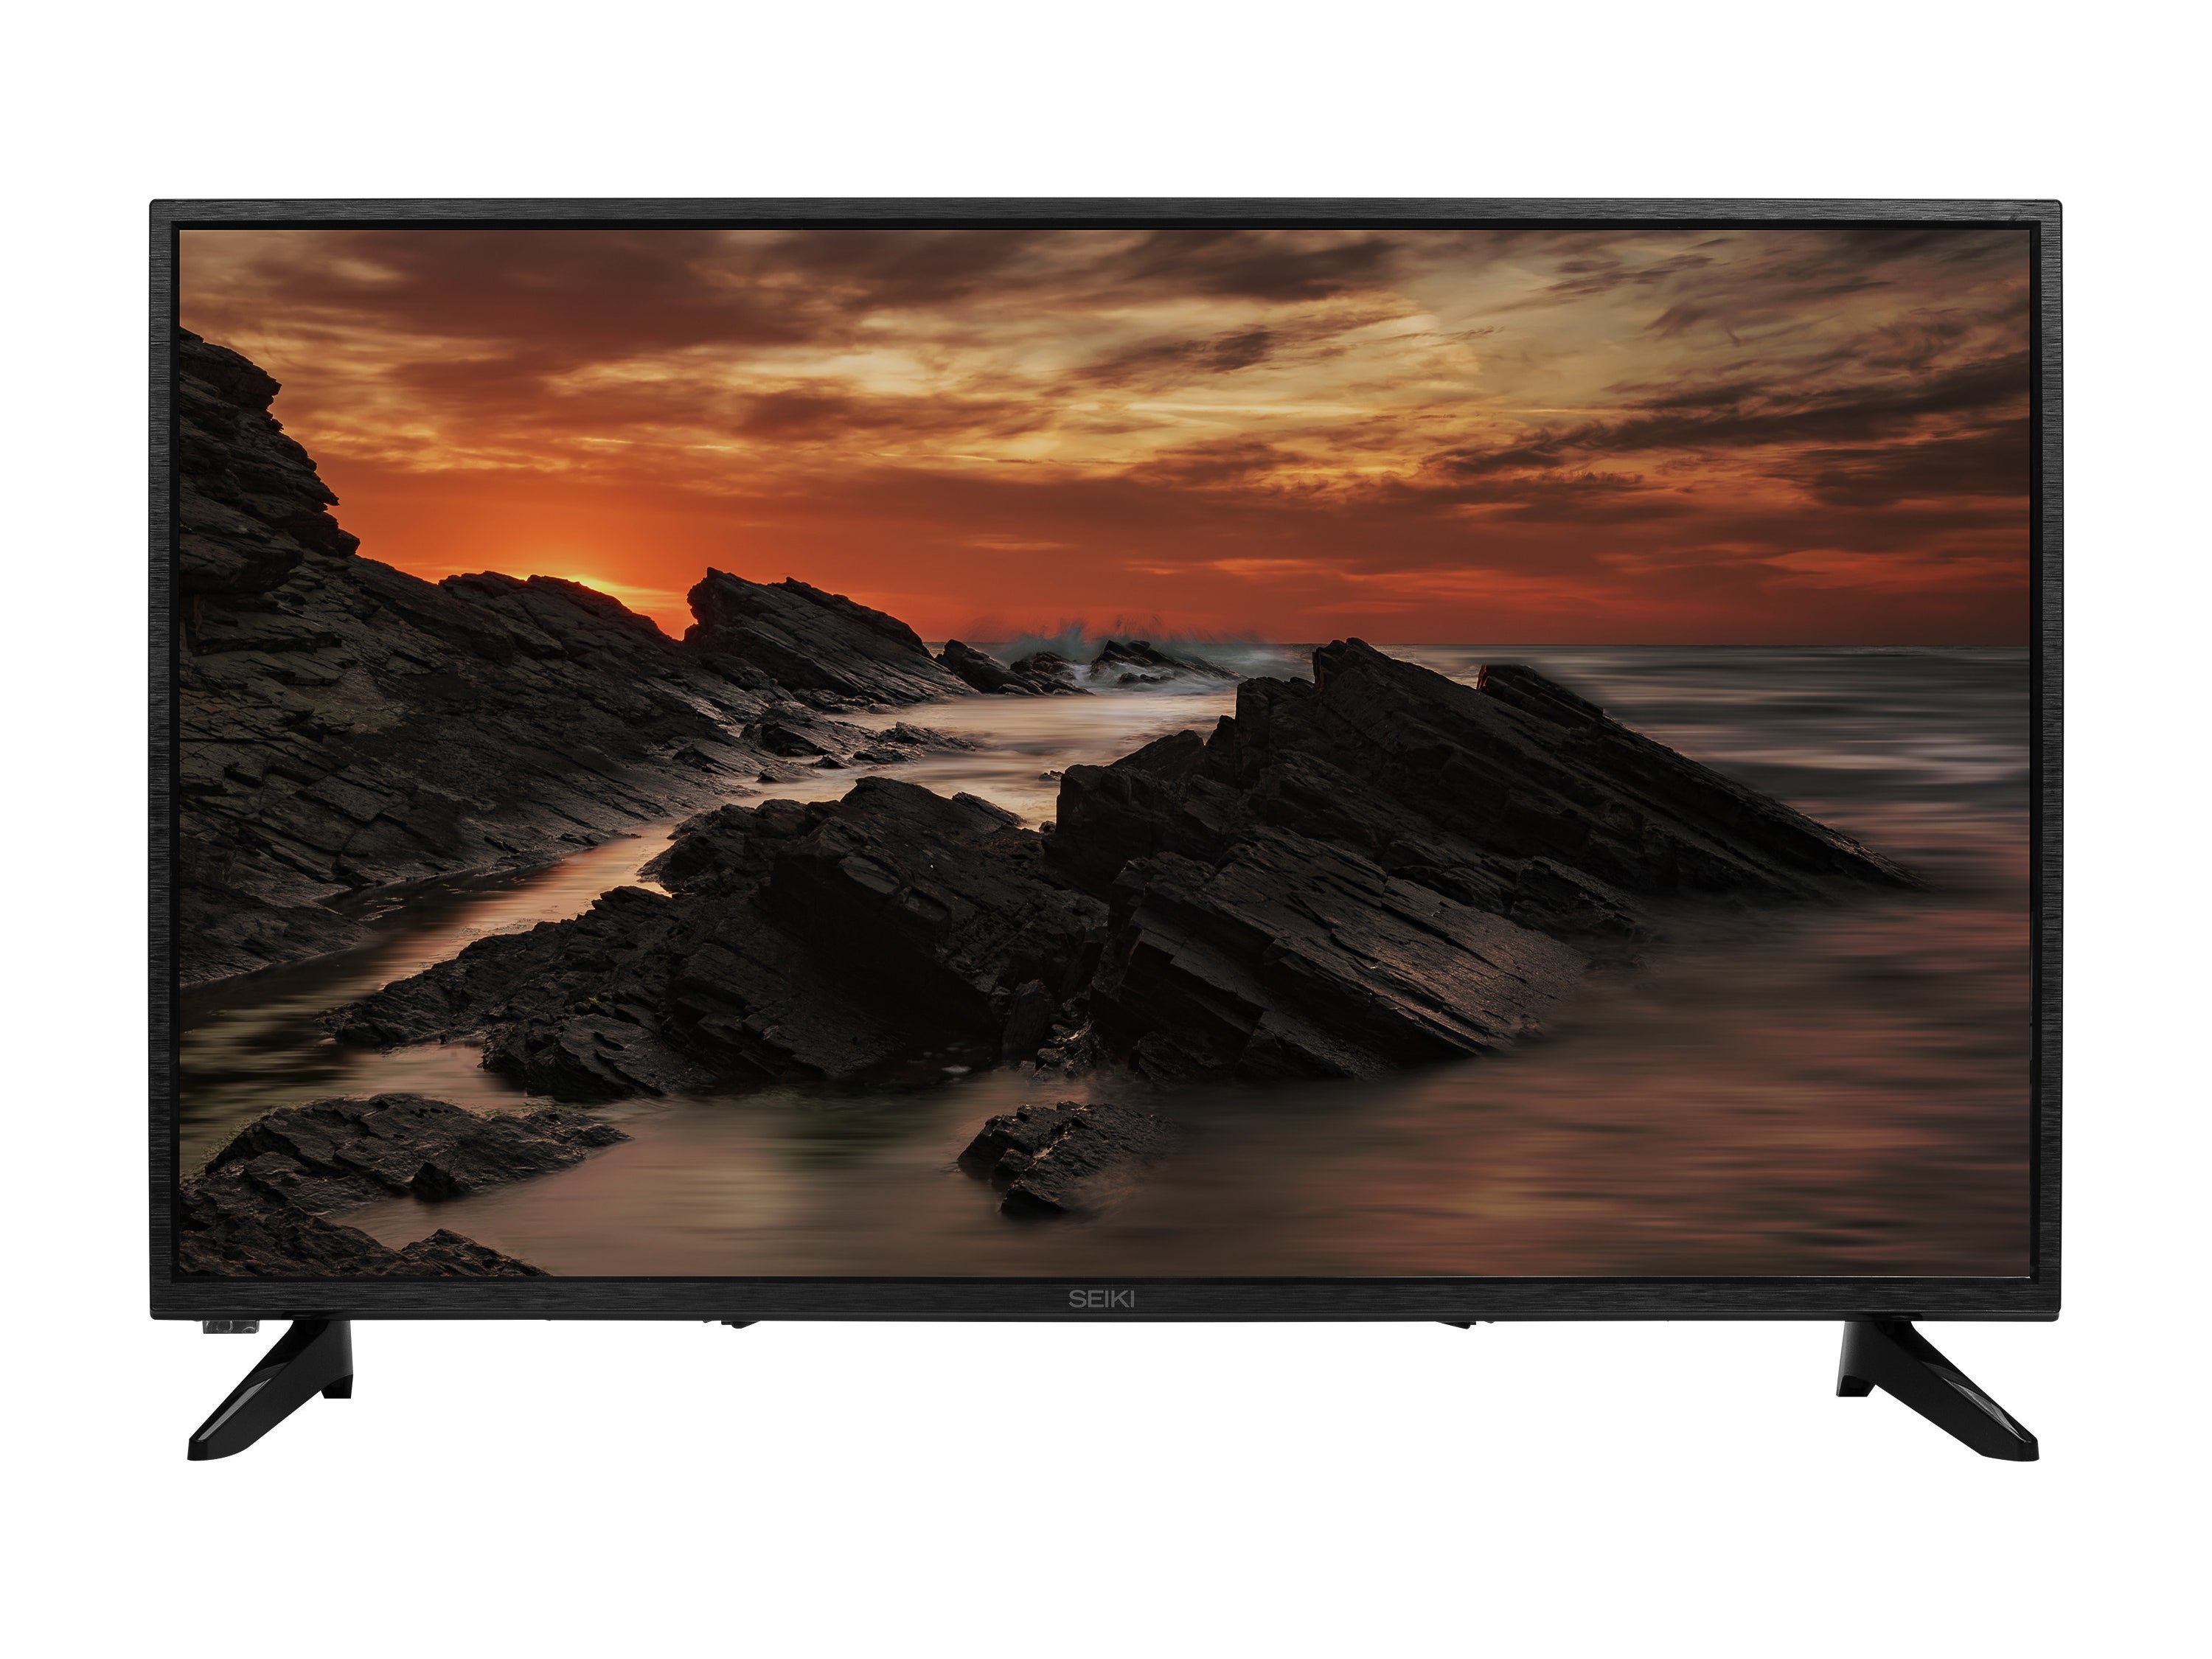 LED television with a nature screen saver